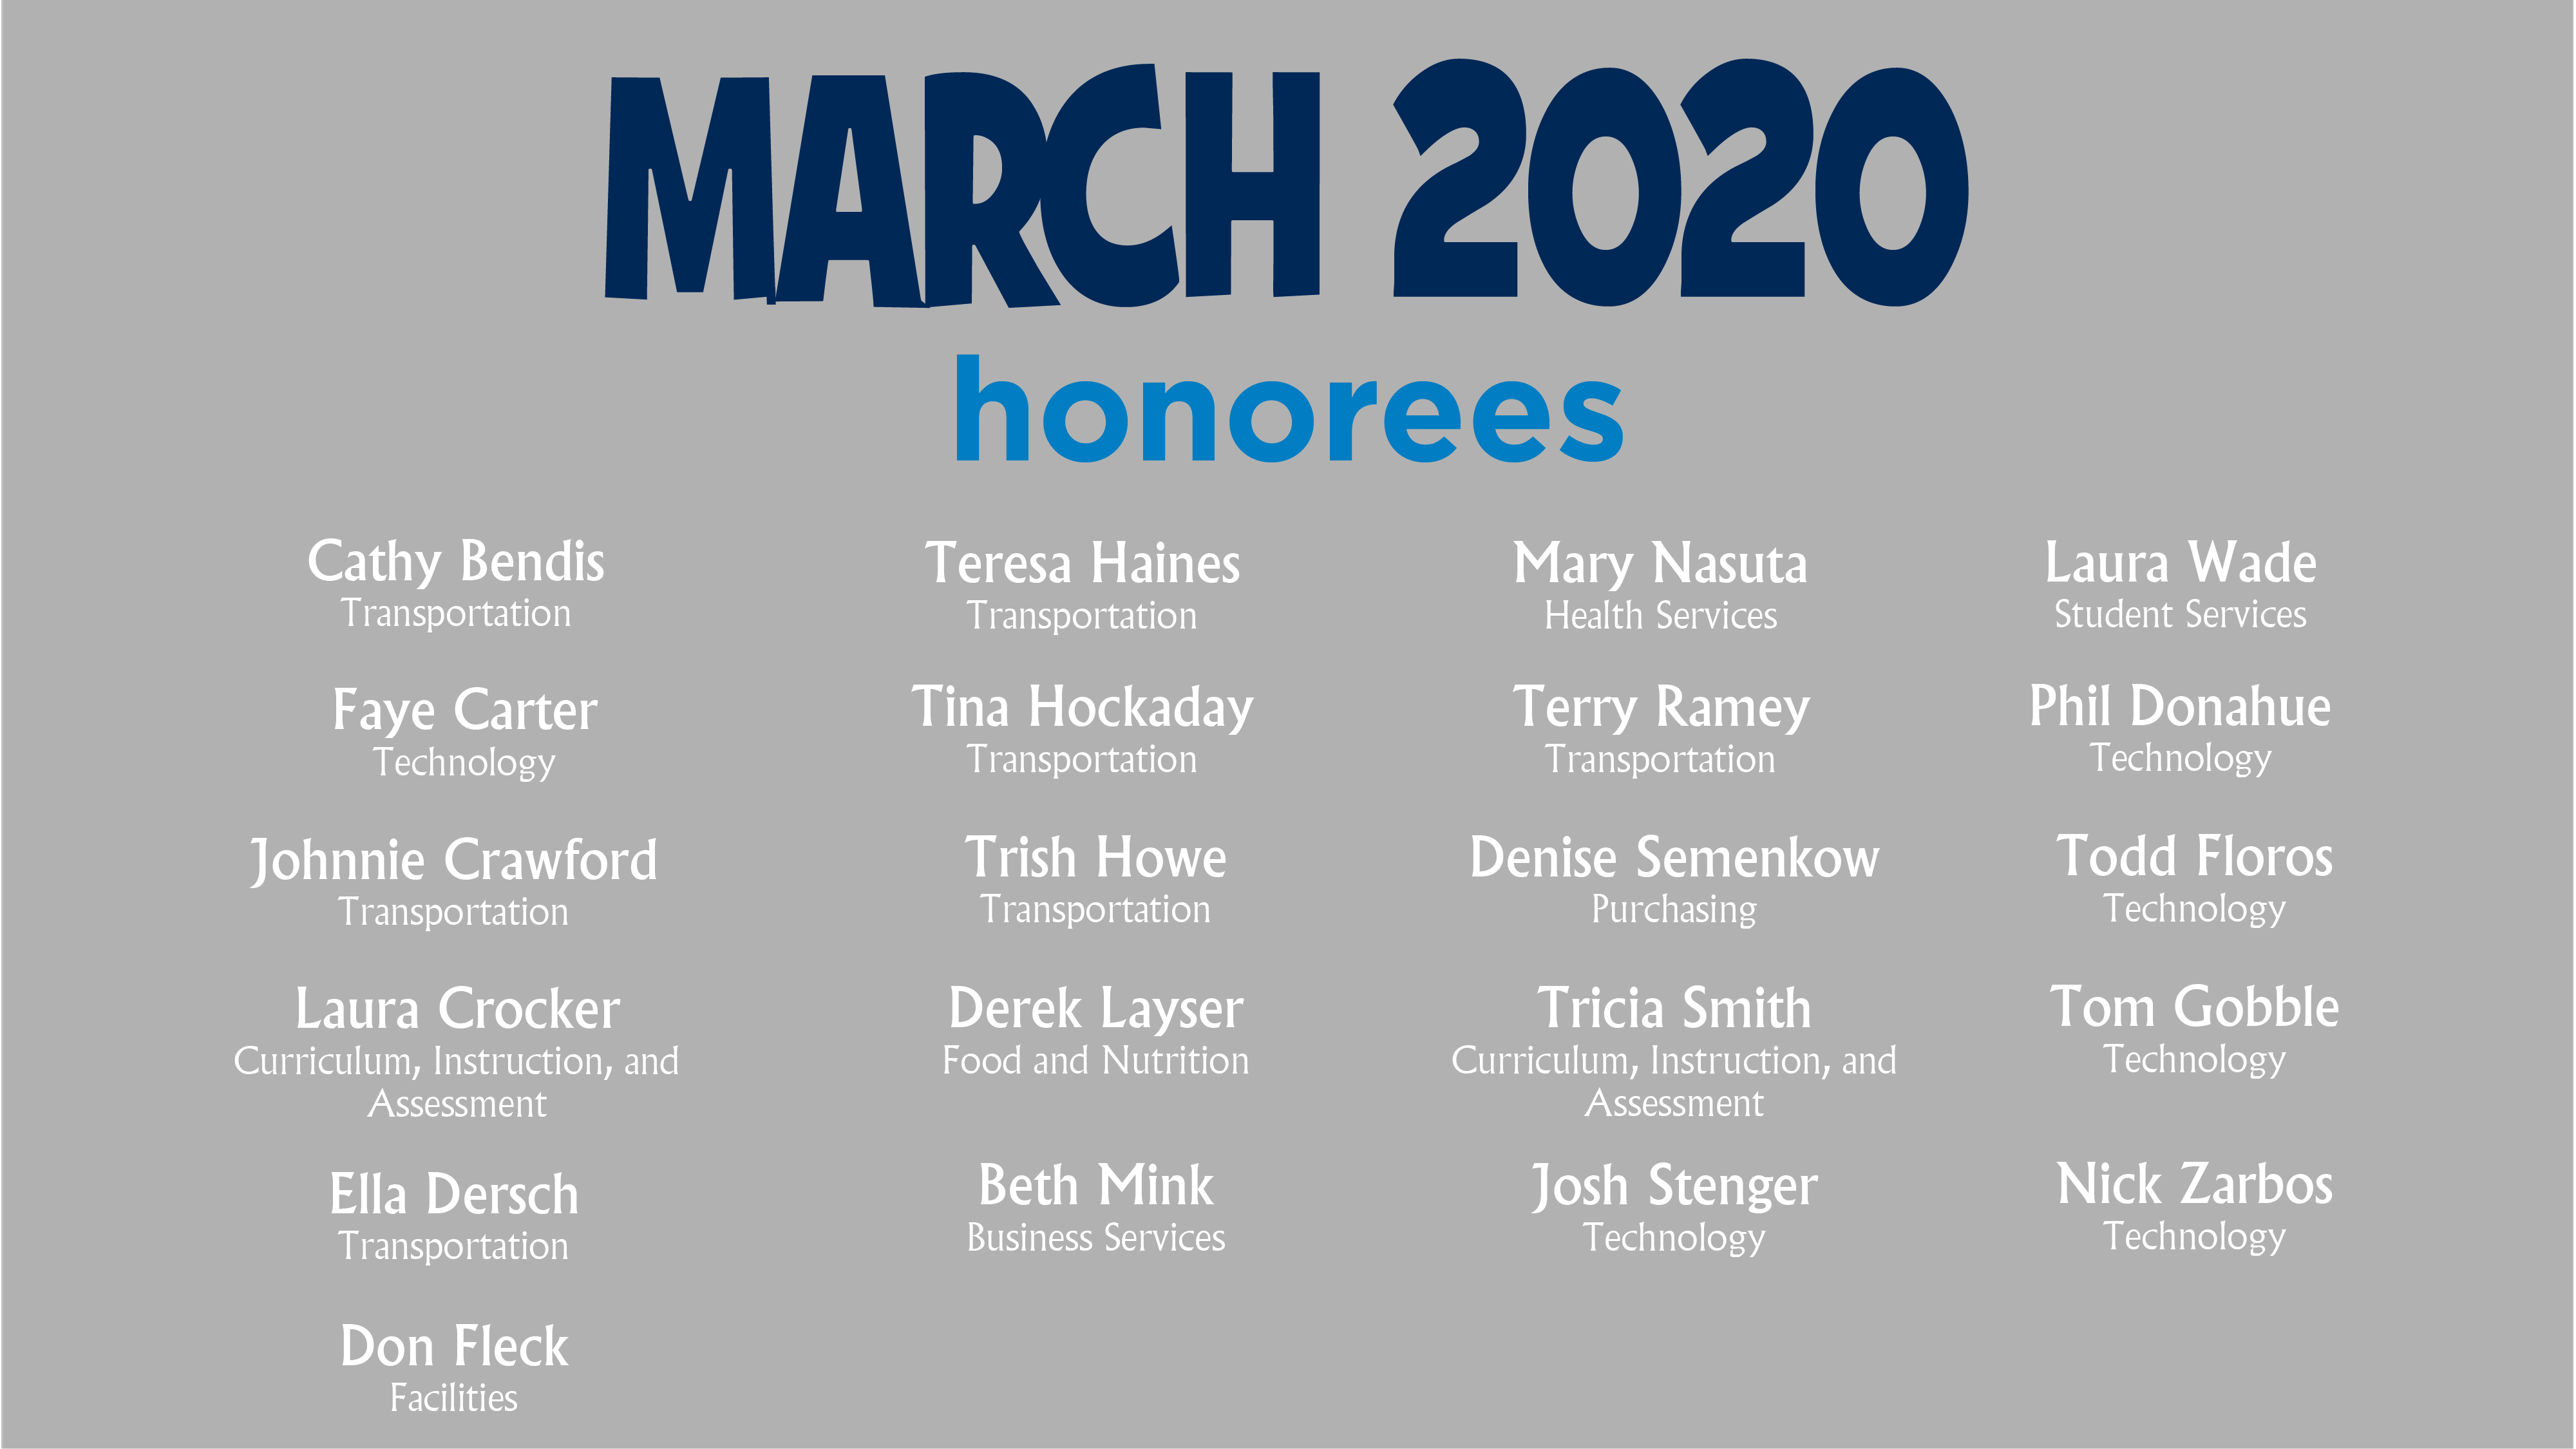 HCPS Bowtie Breakfast Honorees - March 2020